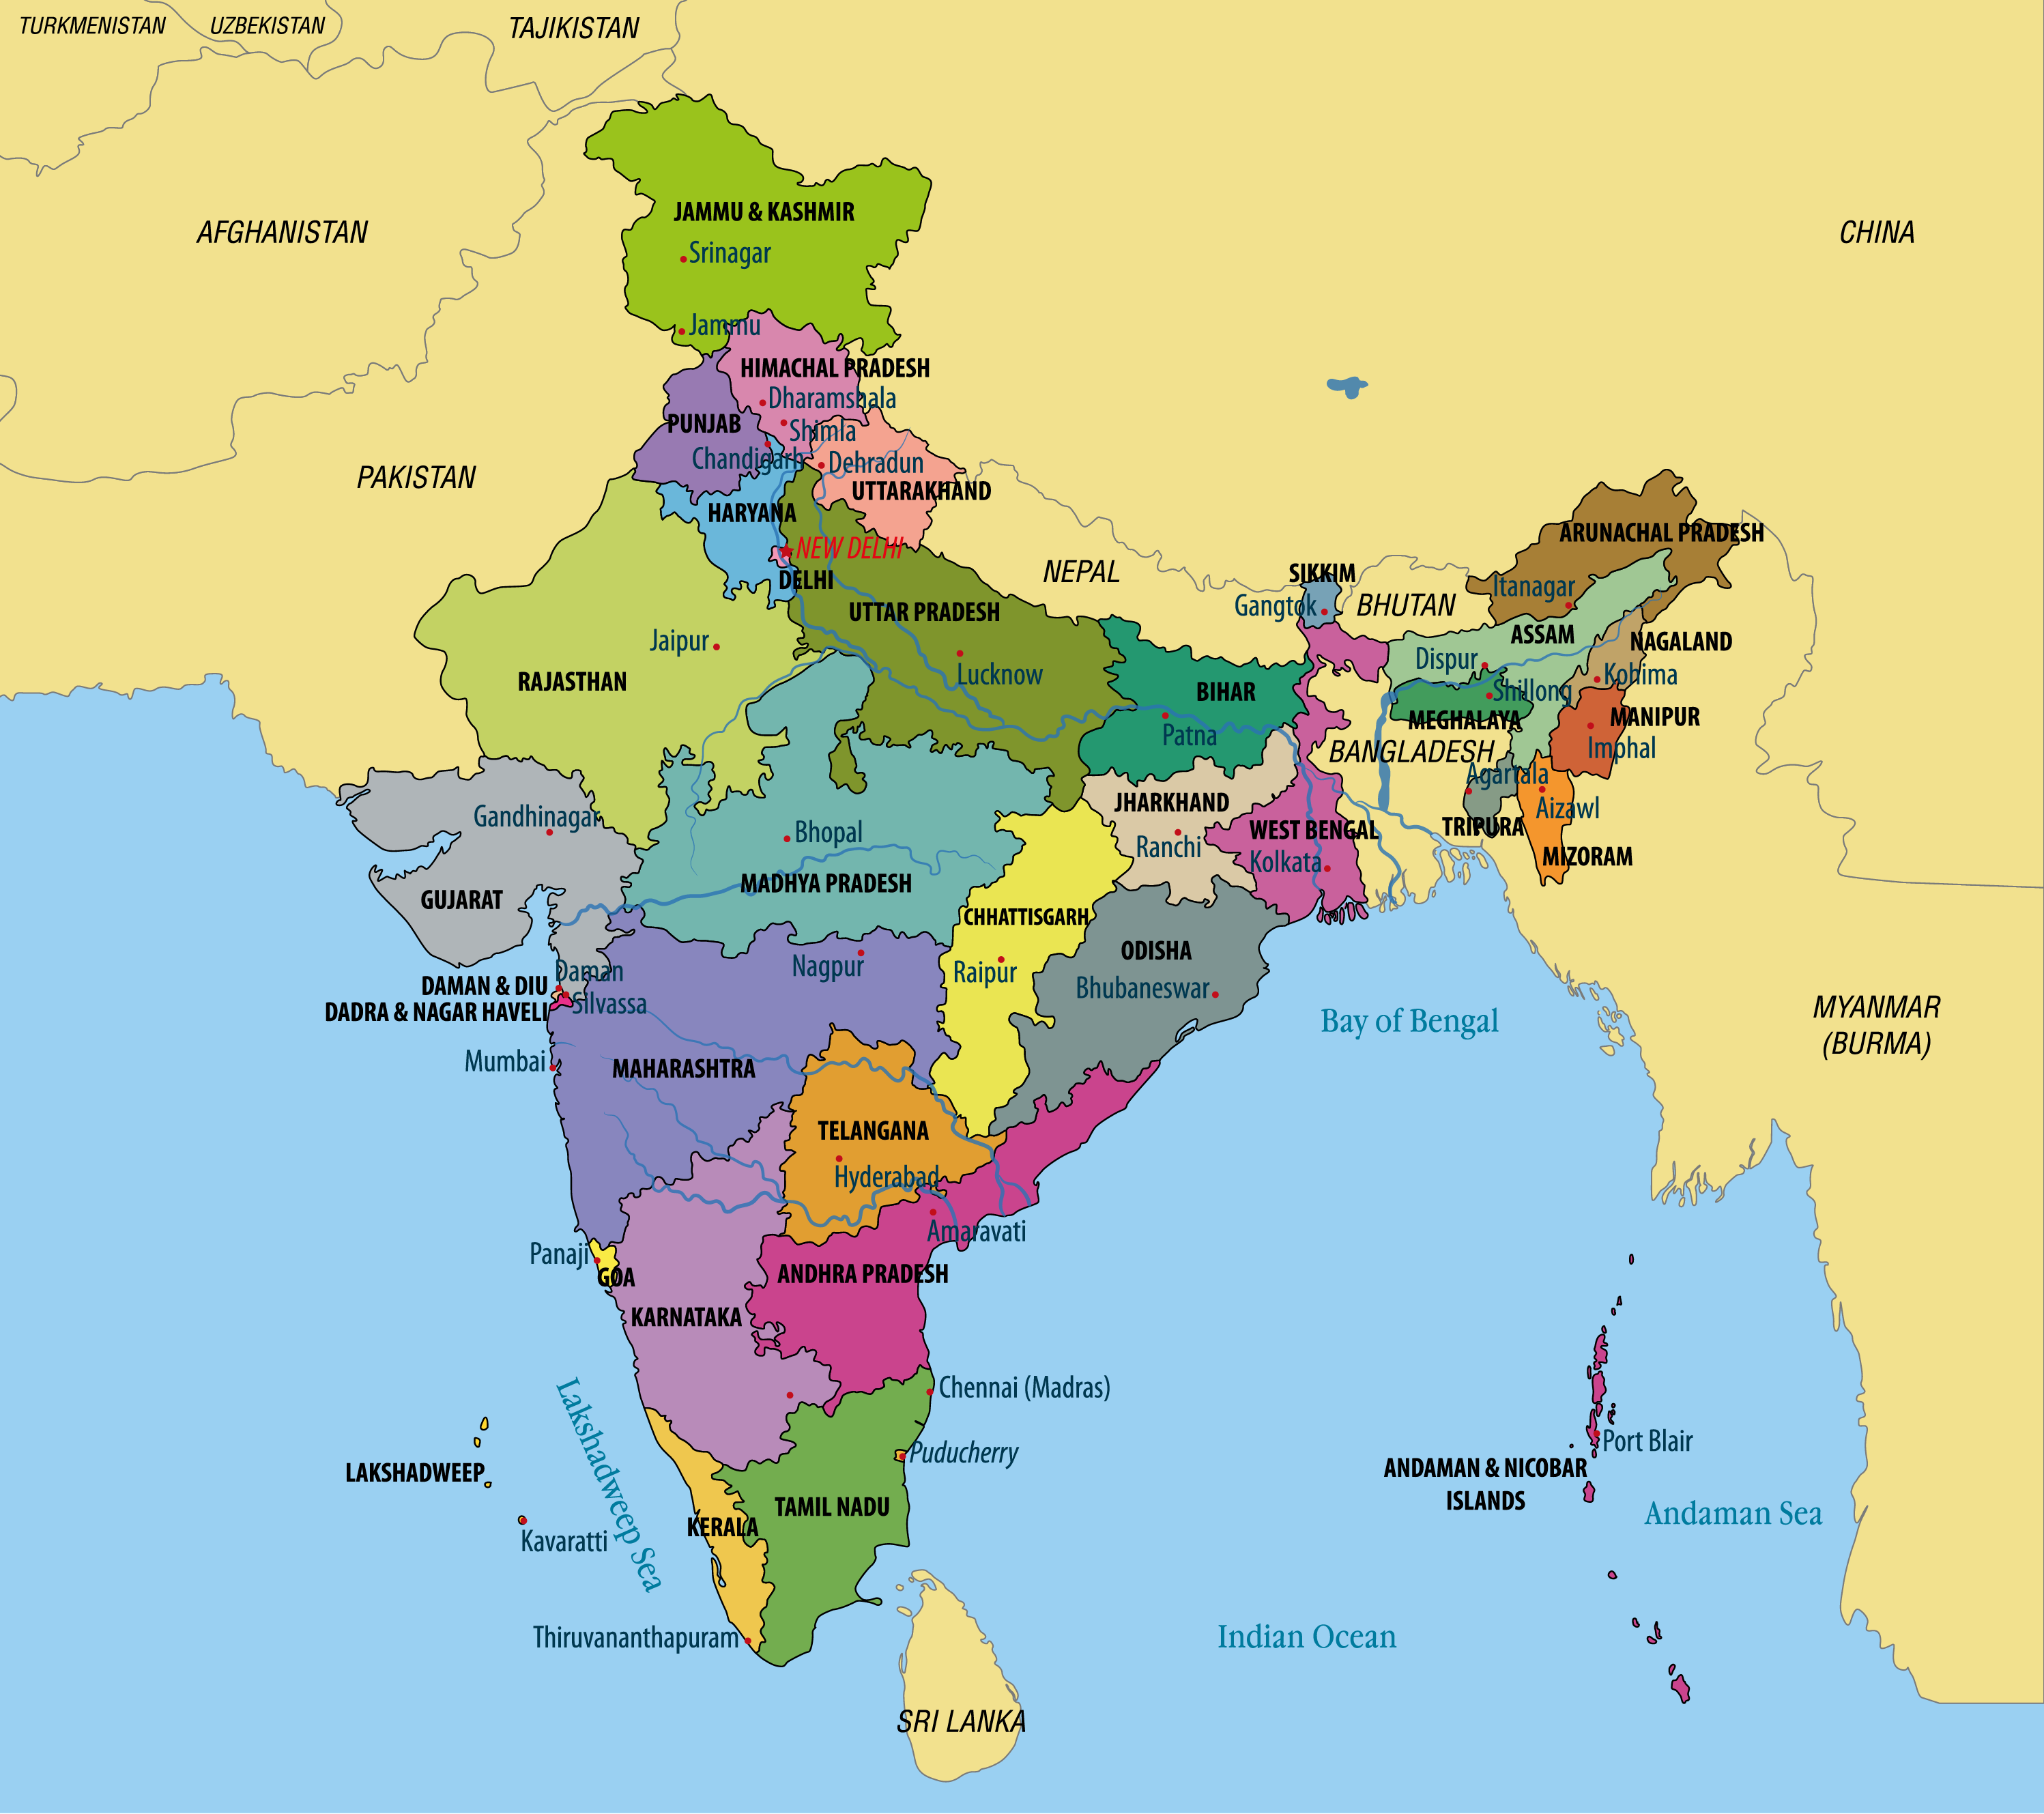 Draw a Physical Map Of India And Locate Any Five Main Rivers Of India. -  Social Science - Assignment - Teachmint